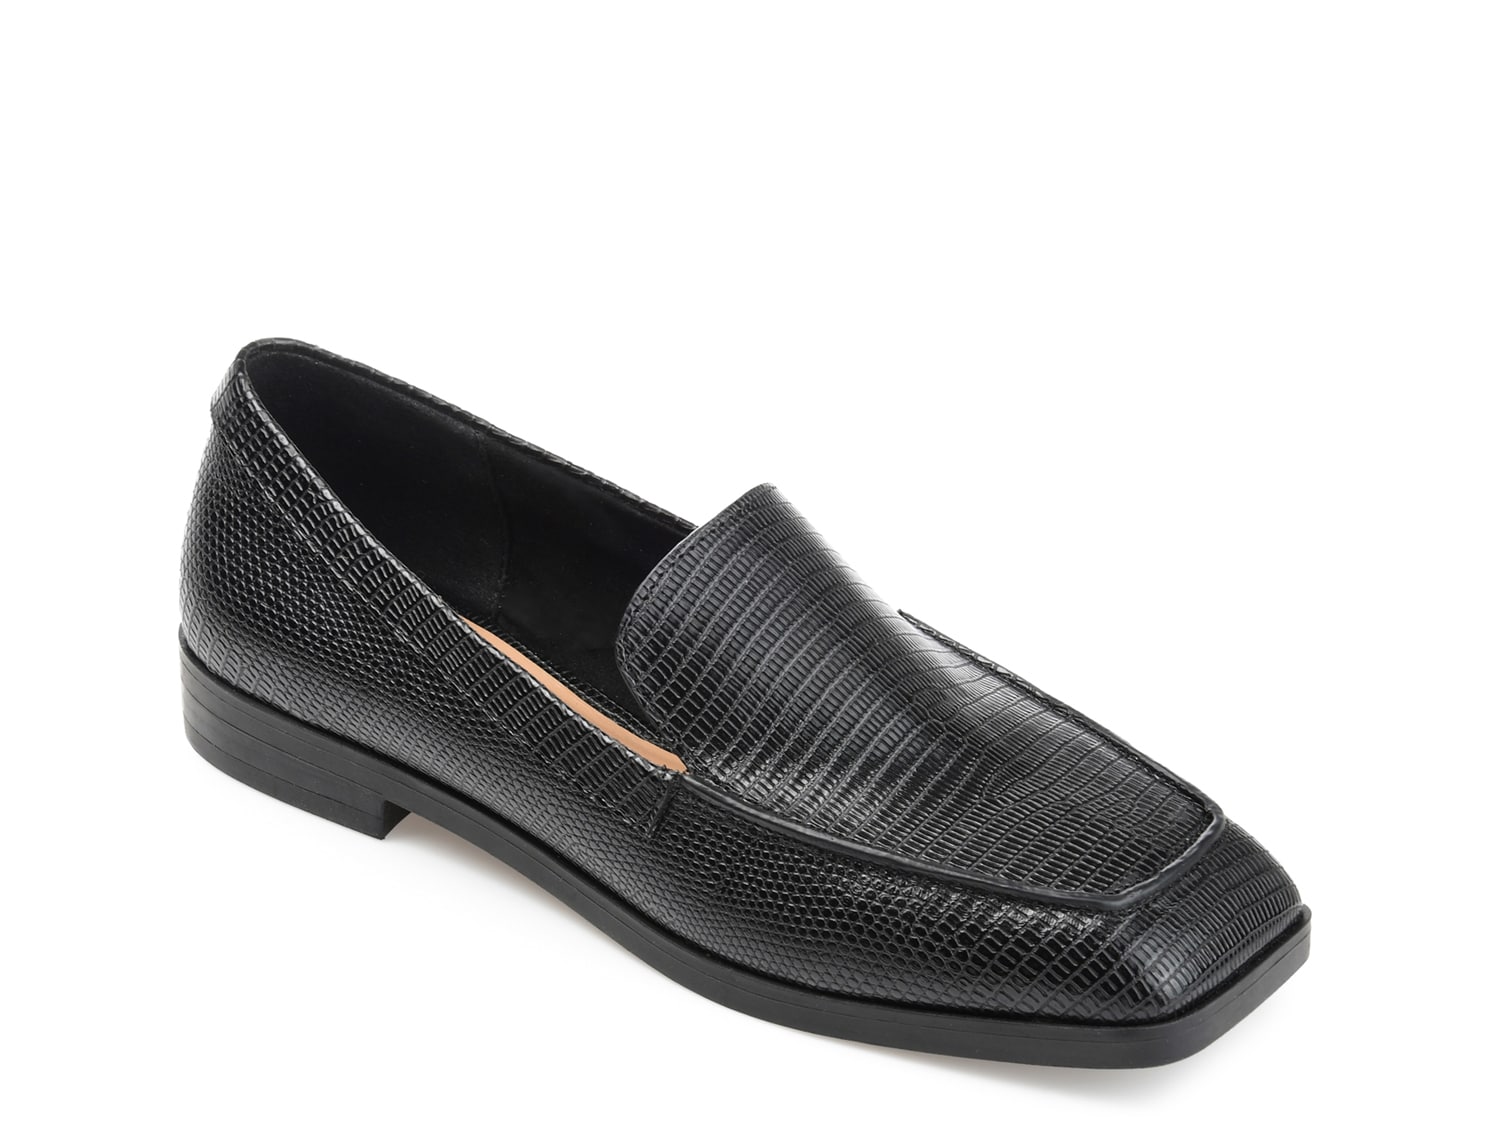 Journee Collection Argentina Loafer - Free Shipping | DSW